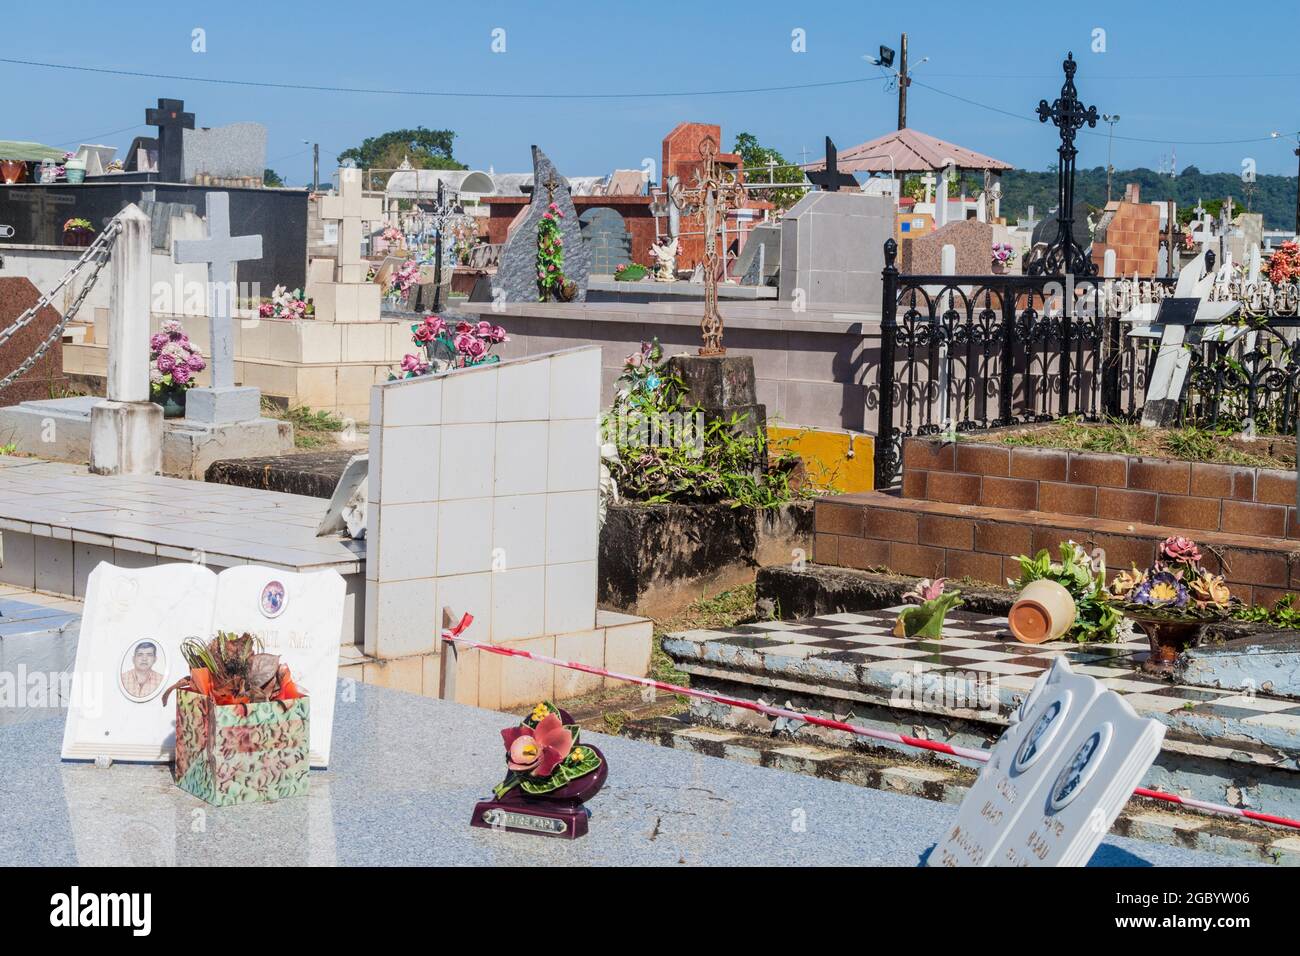 CAYENNE, FRENCH GUIANA - AUGUST 3, 2015: Cemetery in Cayenne, capital of French Guiana. Stock Photo